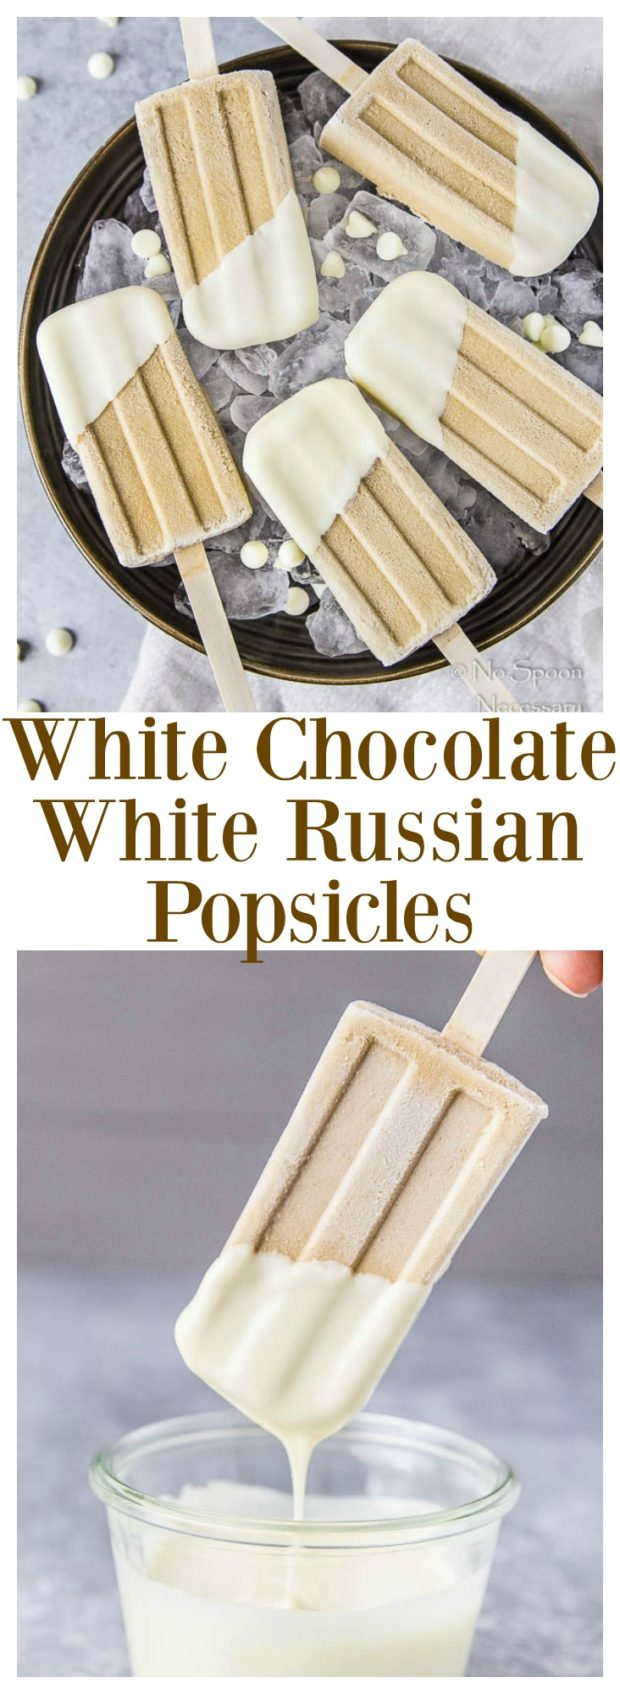 White Chocolate White Russian Popsicles-short pin2